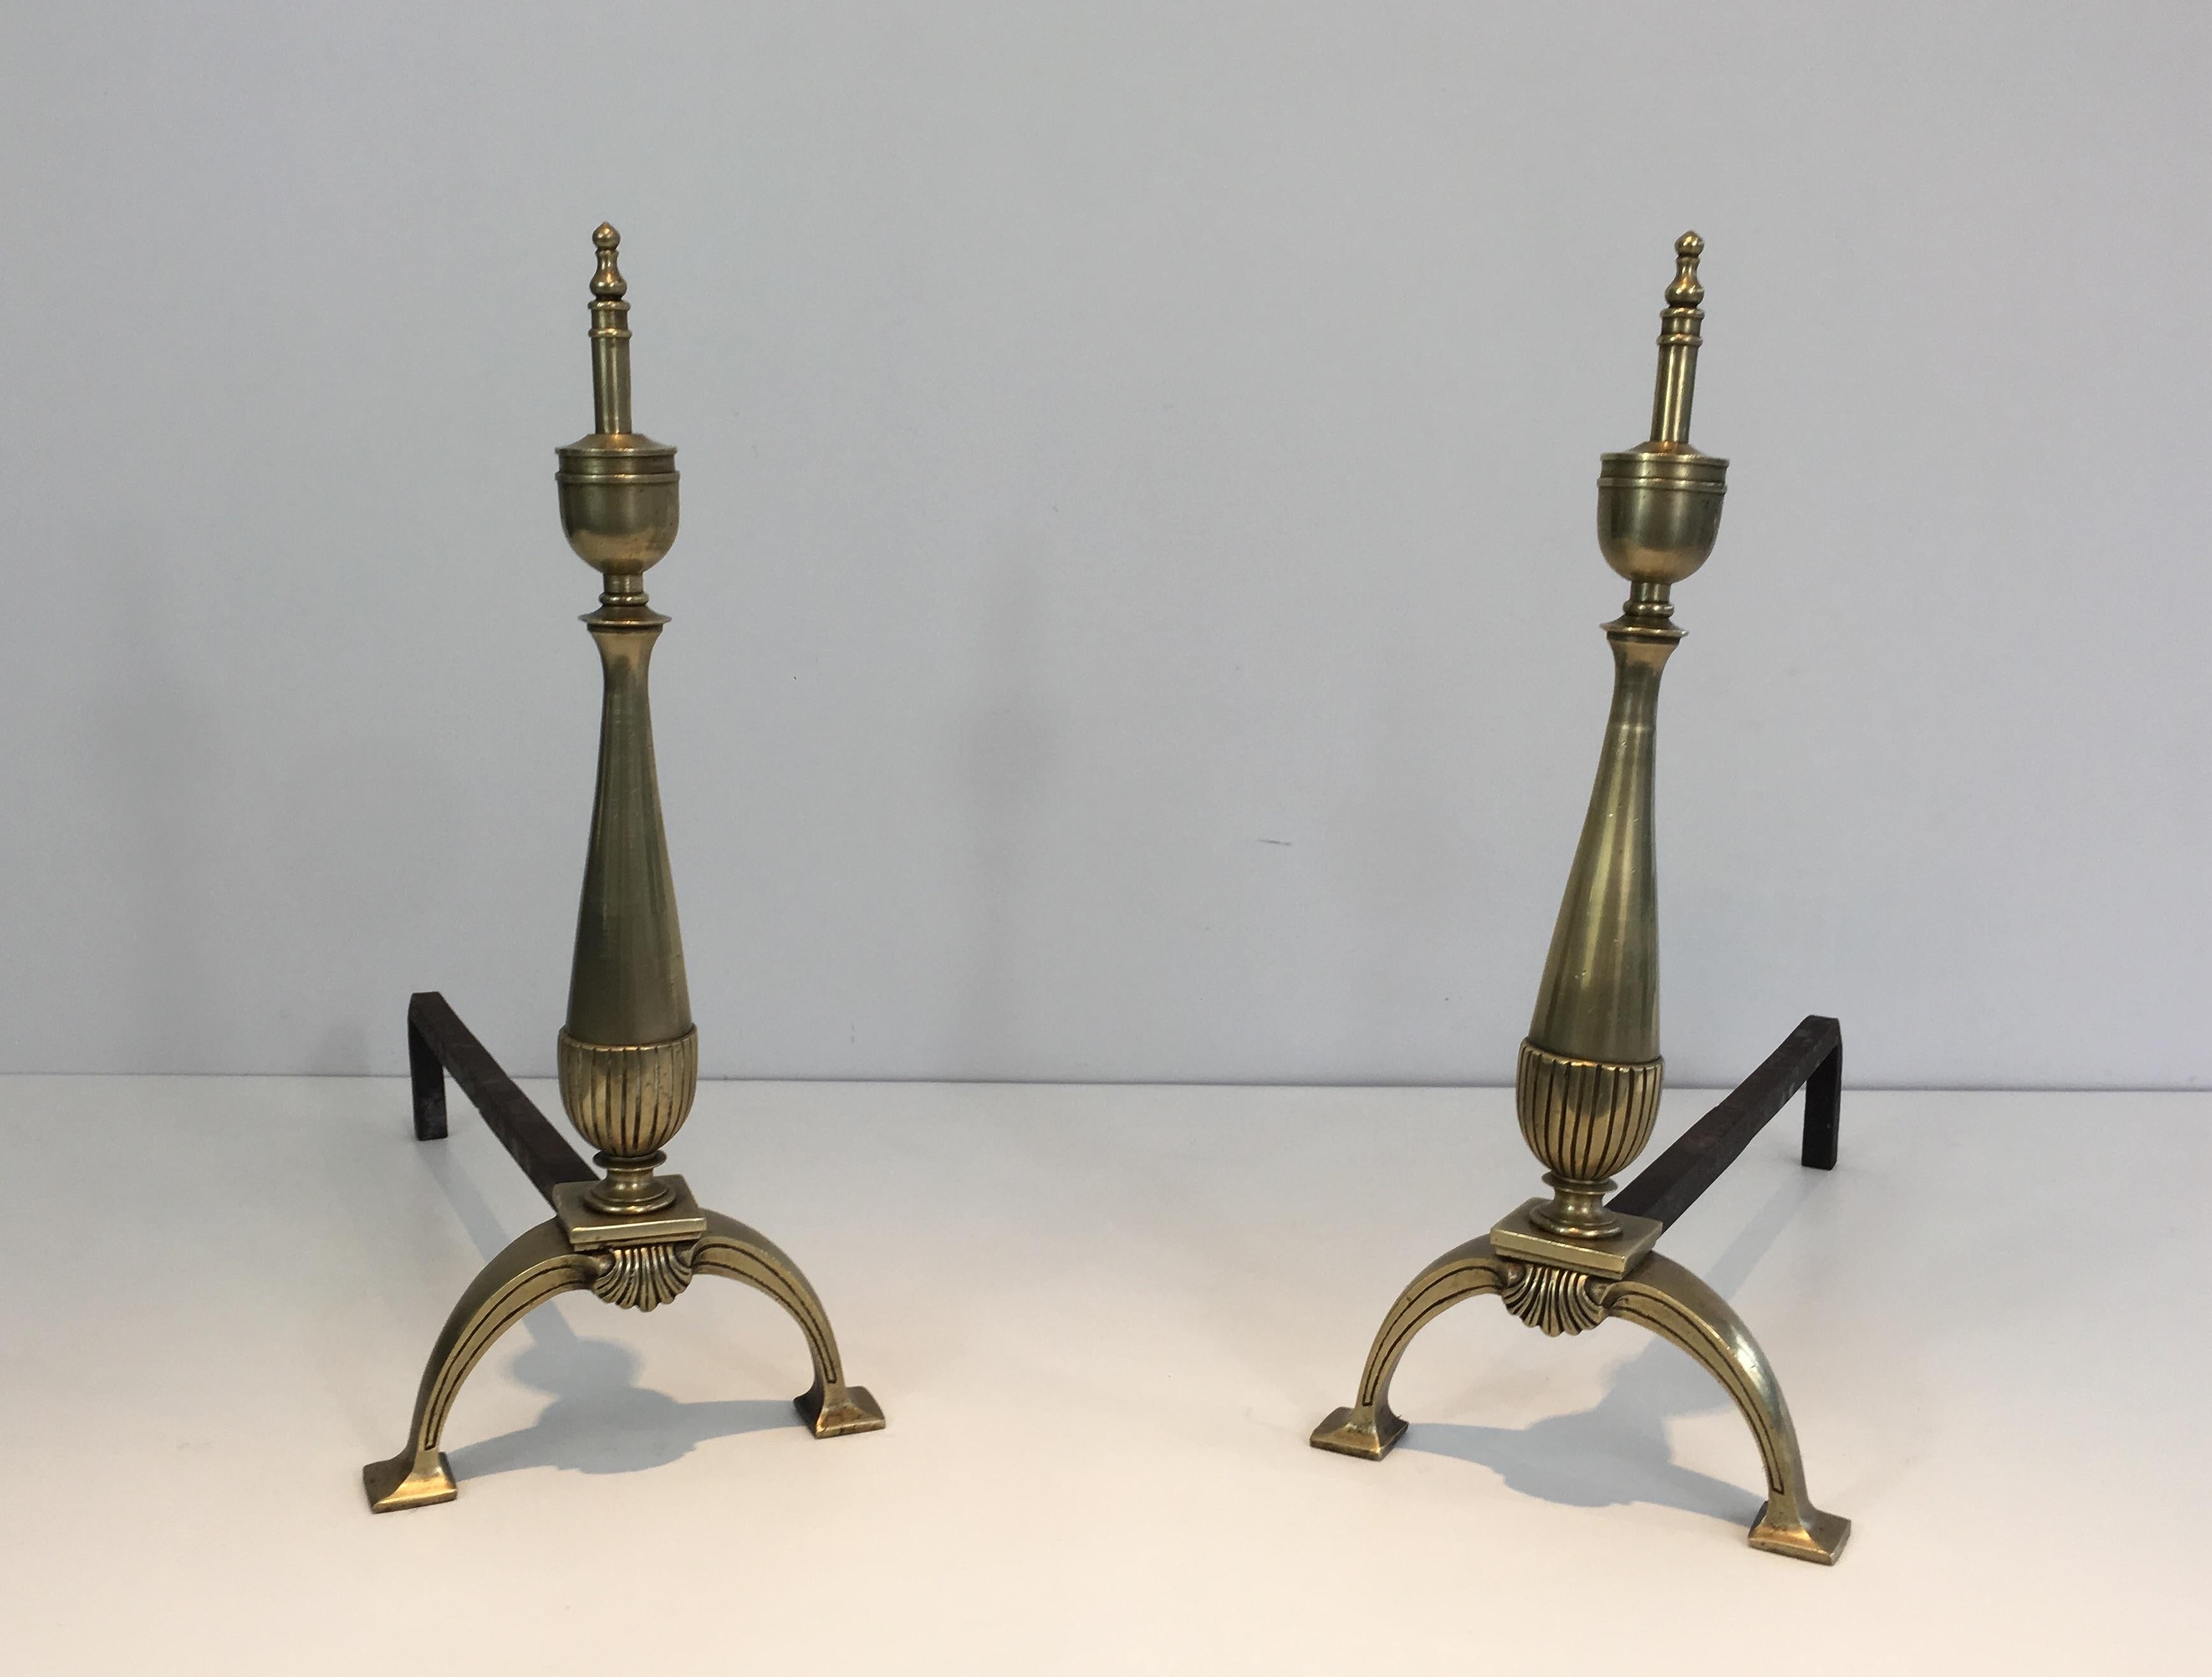 This elegant pair of andirons in the neoclassical style is made of brass and wrought iron. This is a French work. Circa 1940.